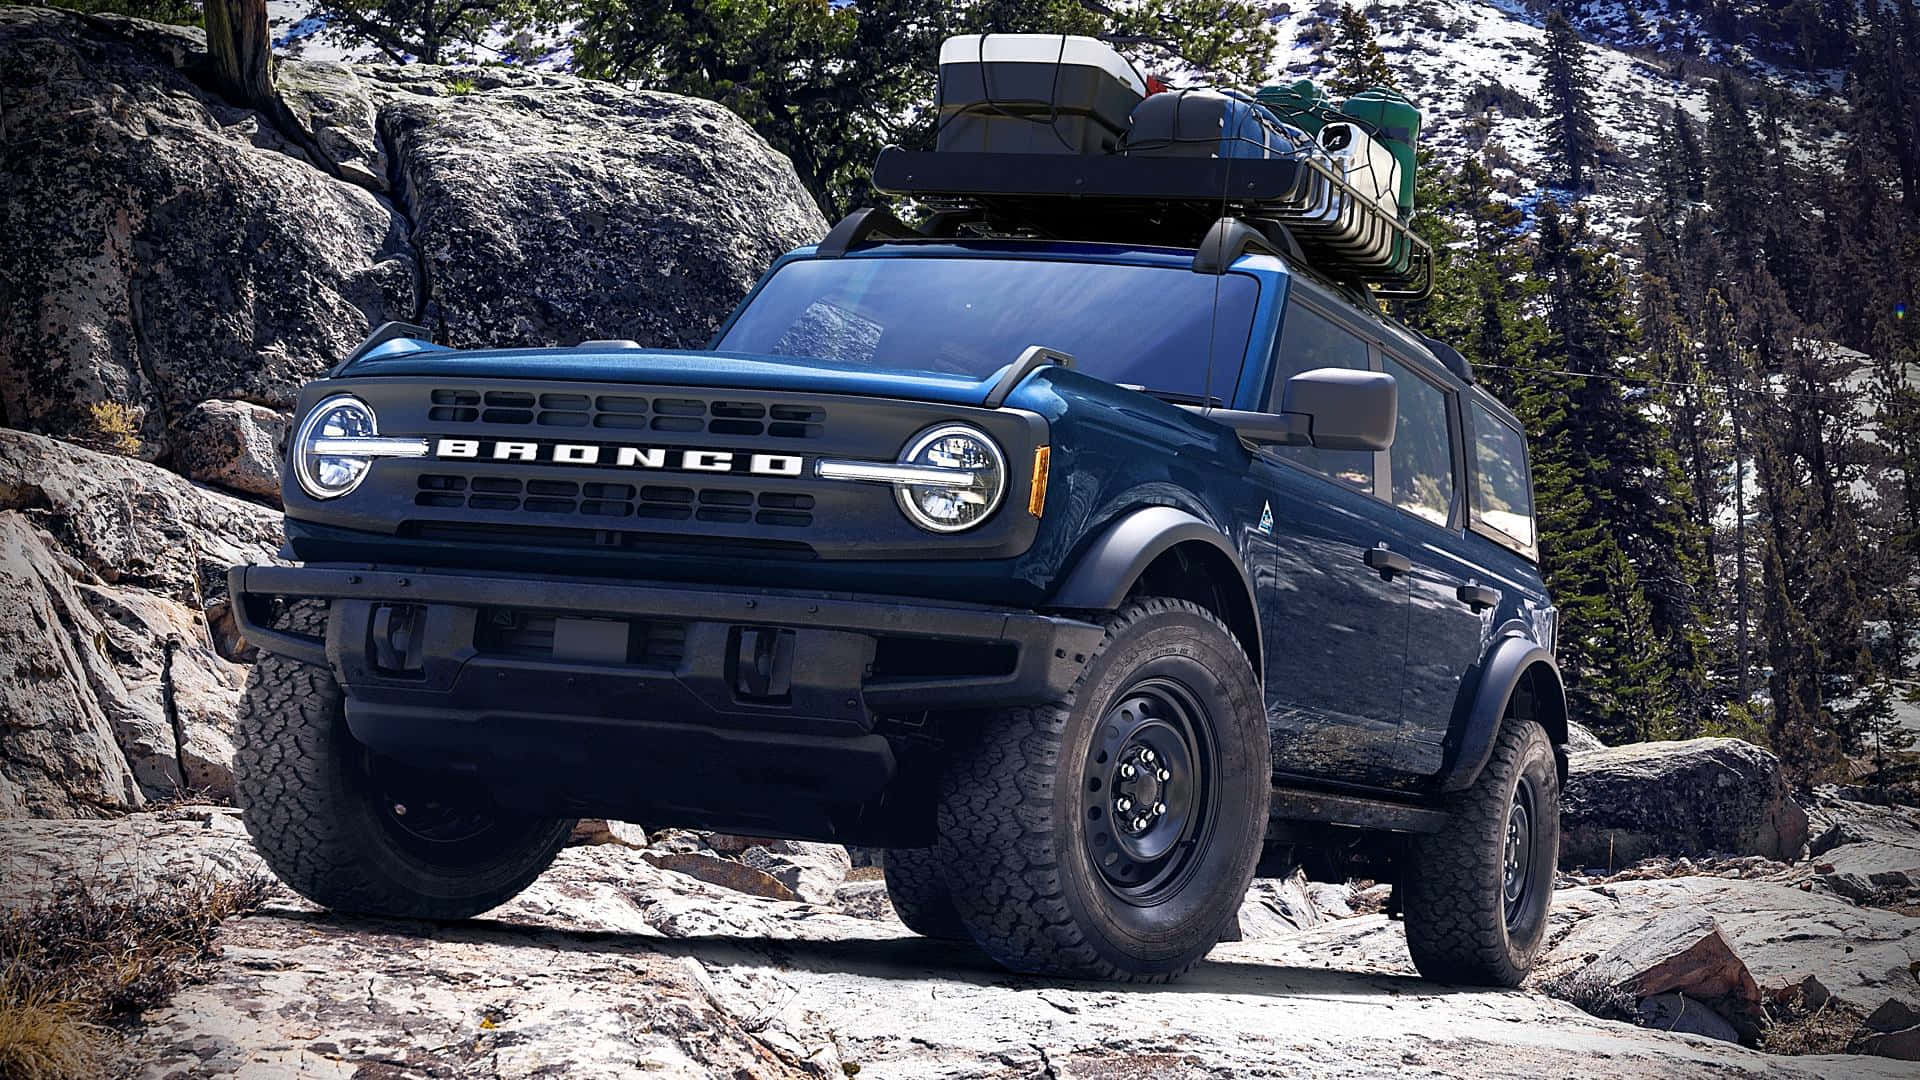 The 2020 Ford Bronco Is Driving Down A Rocky Mountain Road